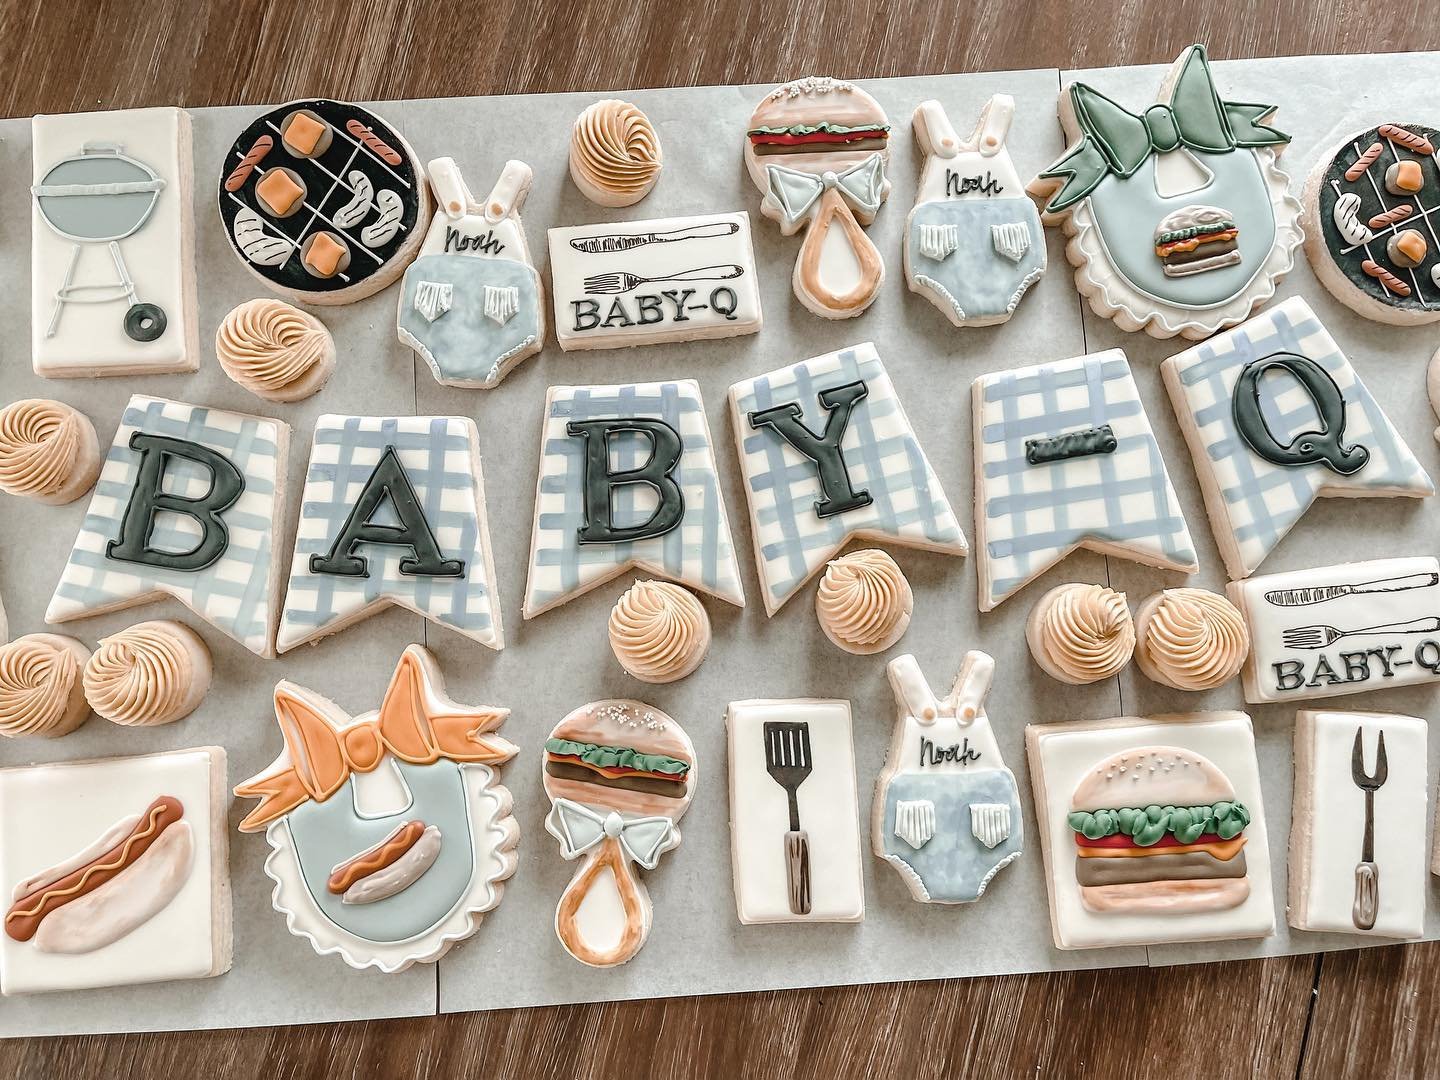 MH-Cookie-Shoppe-Baby-shower-decorated-cookies-custom-design-cookies05.jpeg